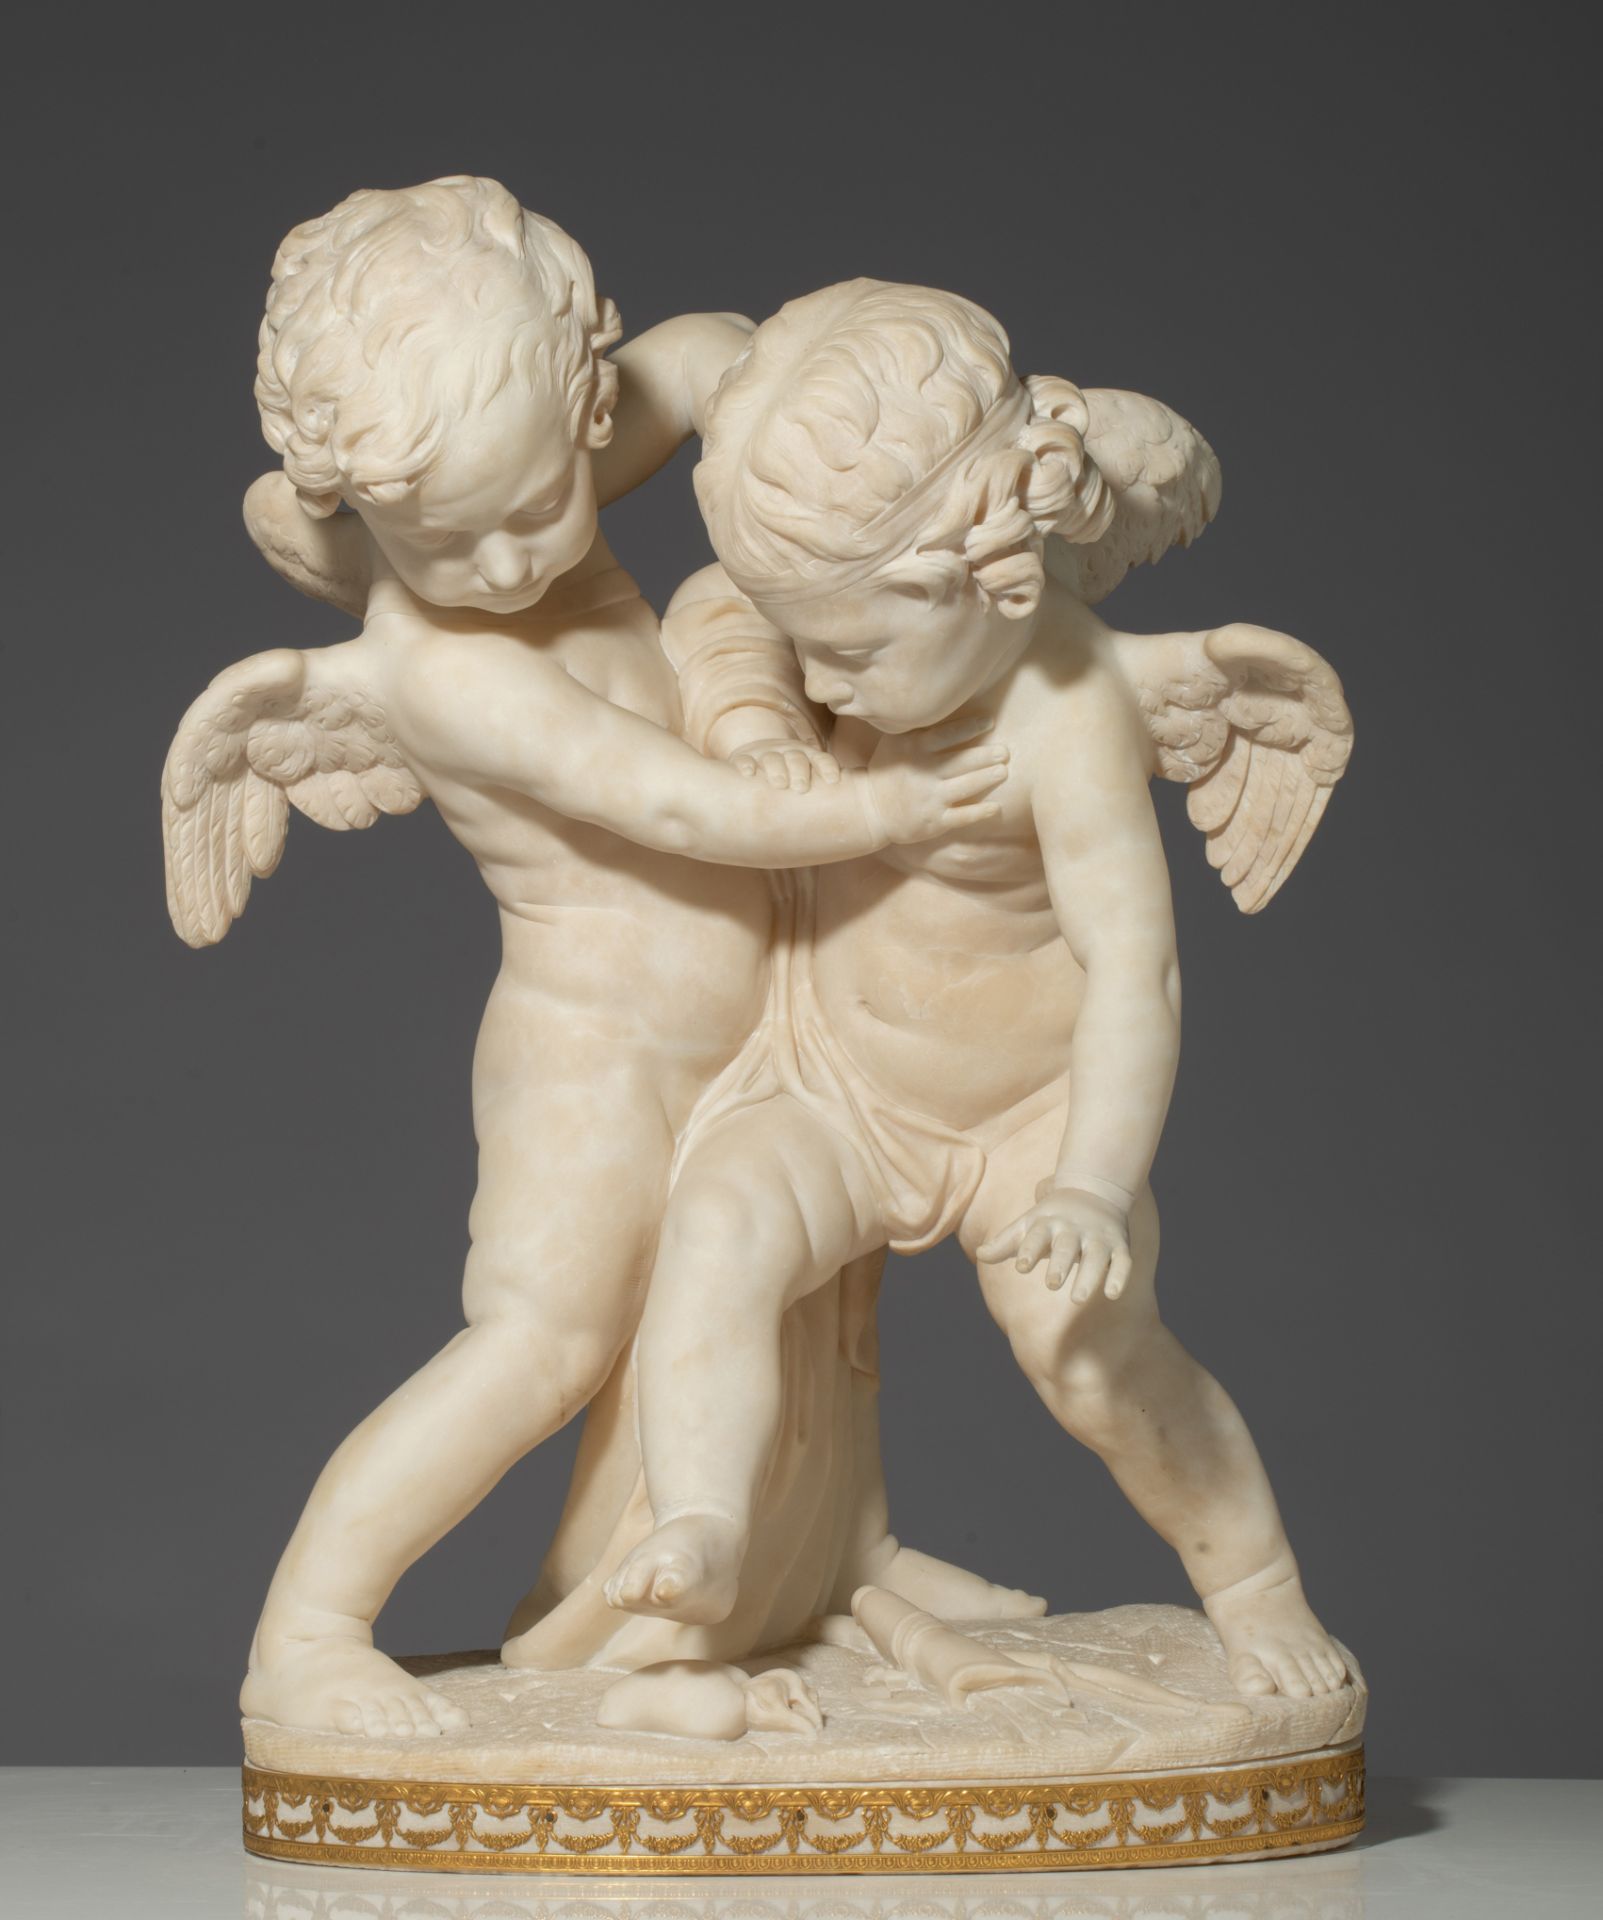 After Etienne Maurice Falconet (1716-1791), 'Bataille d'Amour', Carrara marble, H 70 - W 48 cm - Image 2 of 10